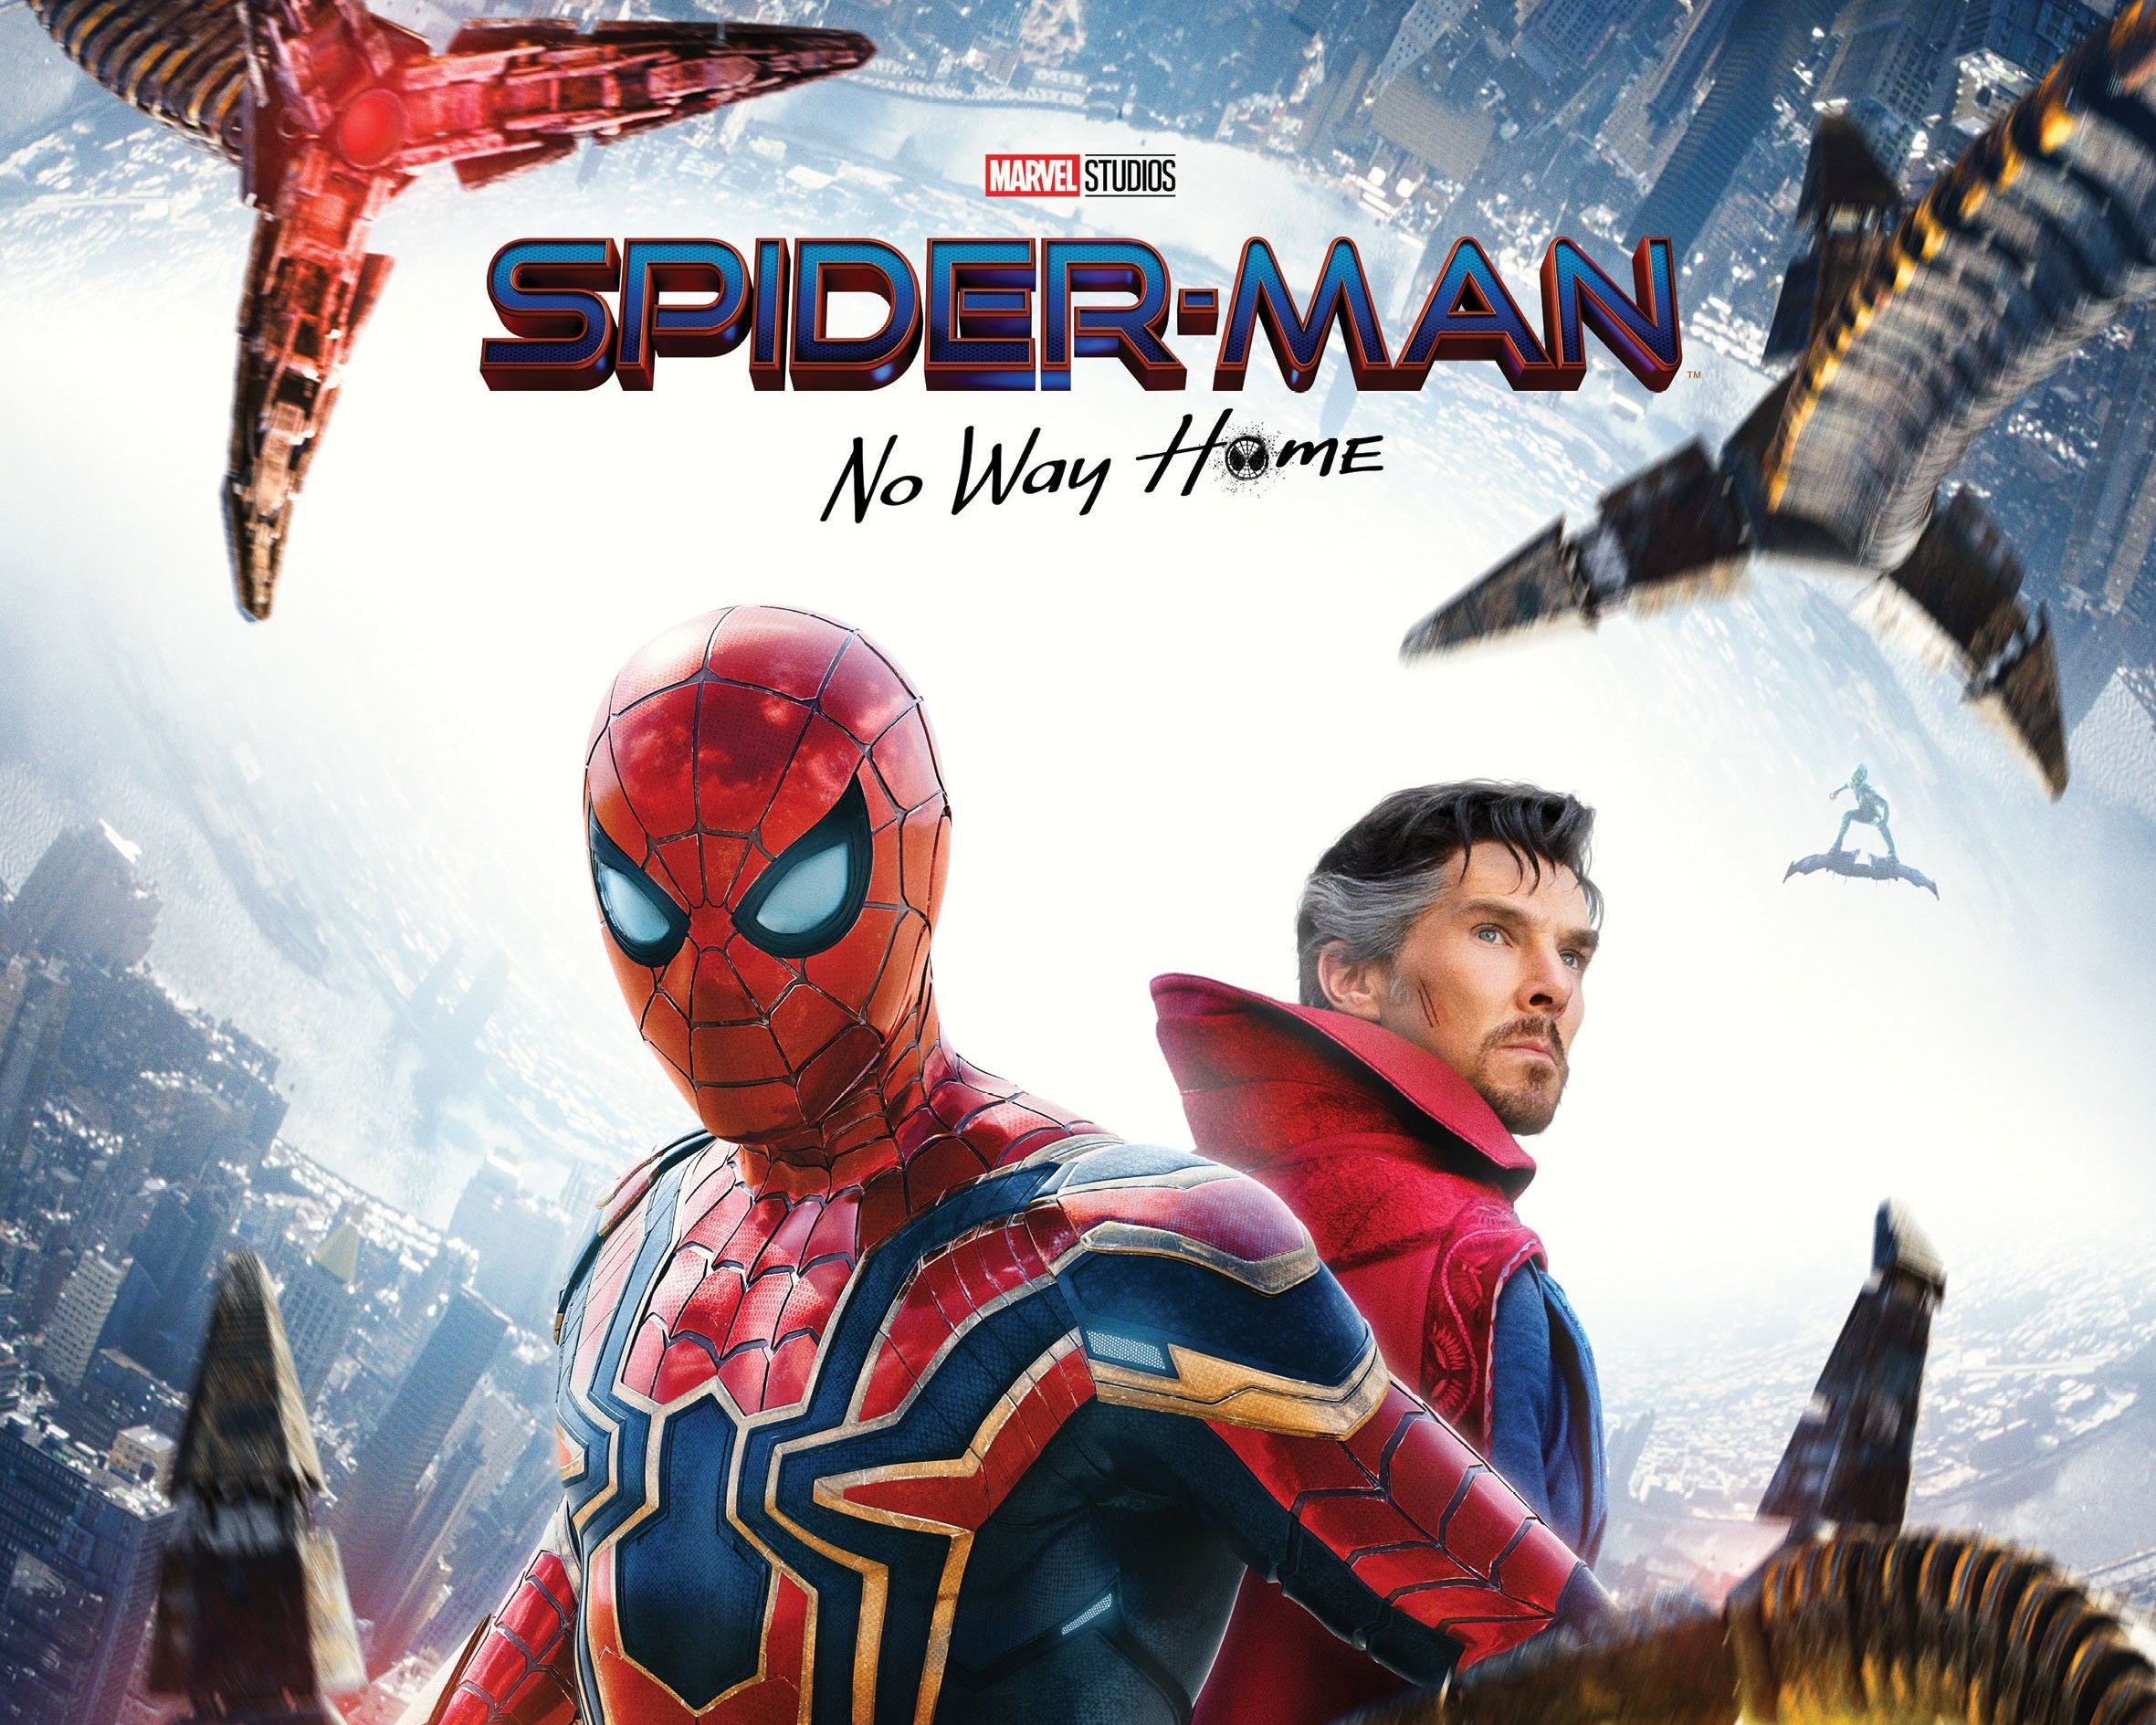 Spider-Man No Way Home DVD giveaway — Popcorn Podcast